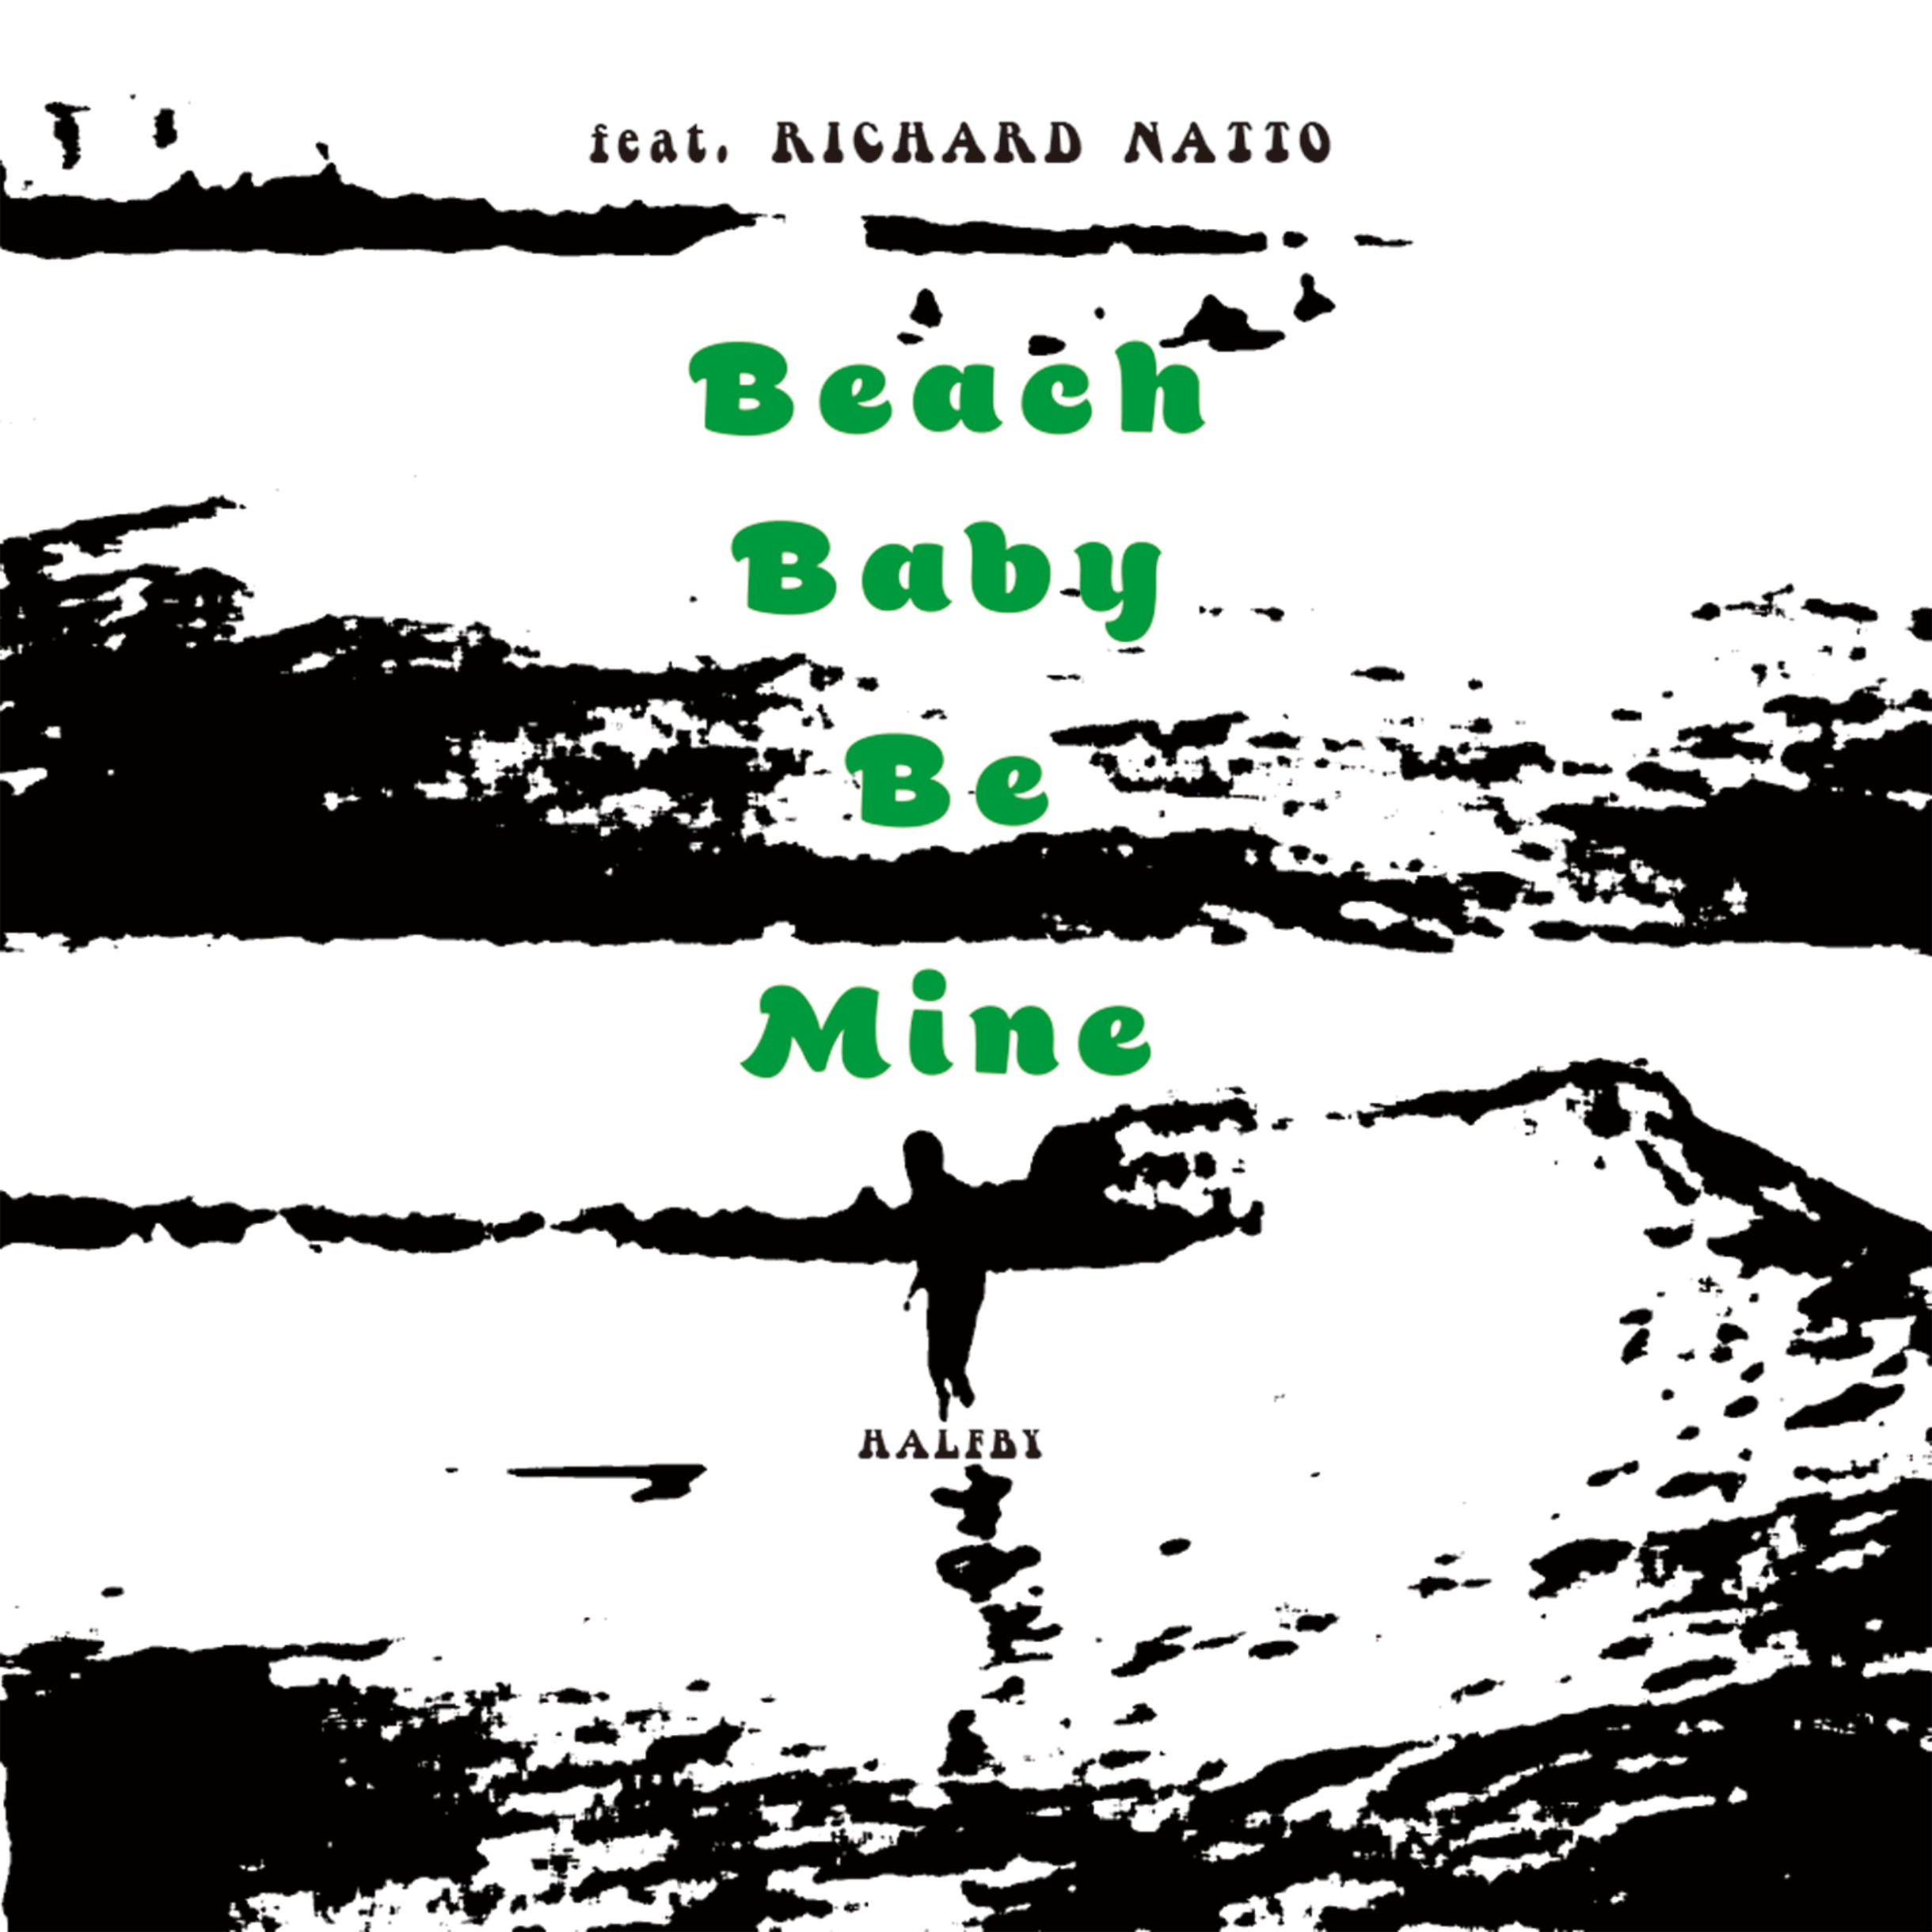 HALFBYの新作『Loco』より“Beach Baby Be Mine feat. Richard Natto”が配信リリース！“Let's Stay Out”の7インチ化も決定 music211112_halfby_01